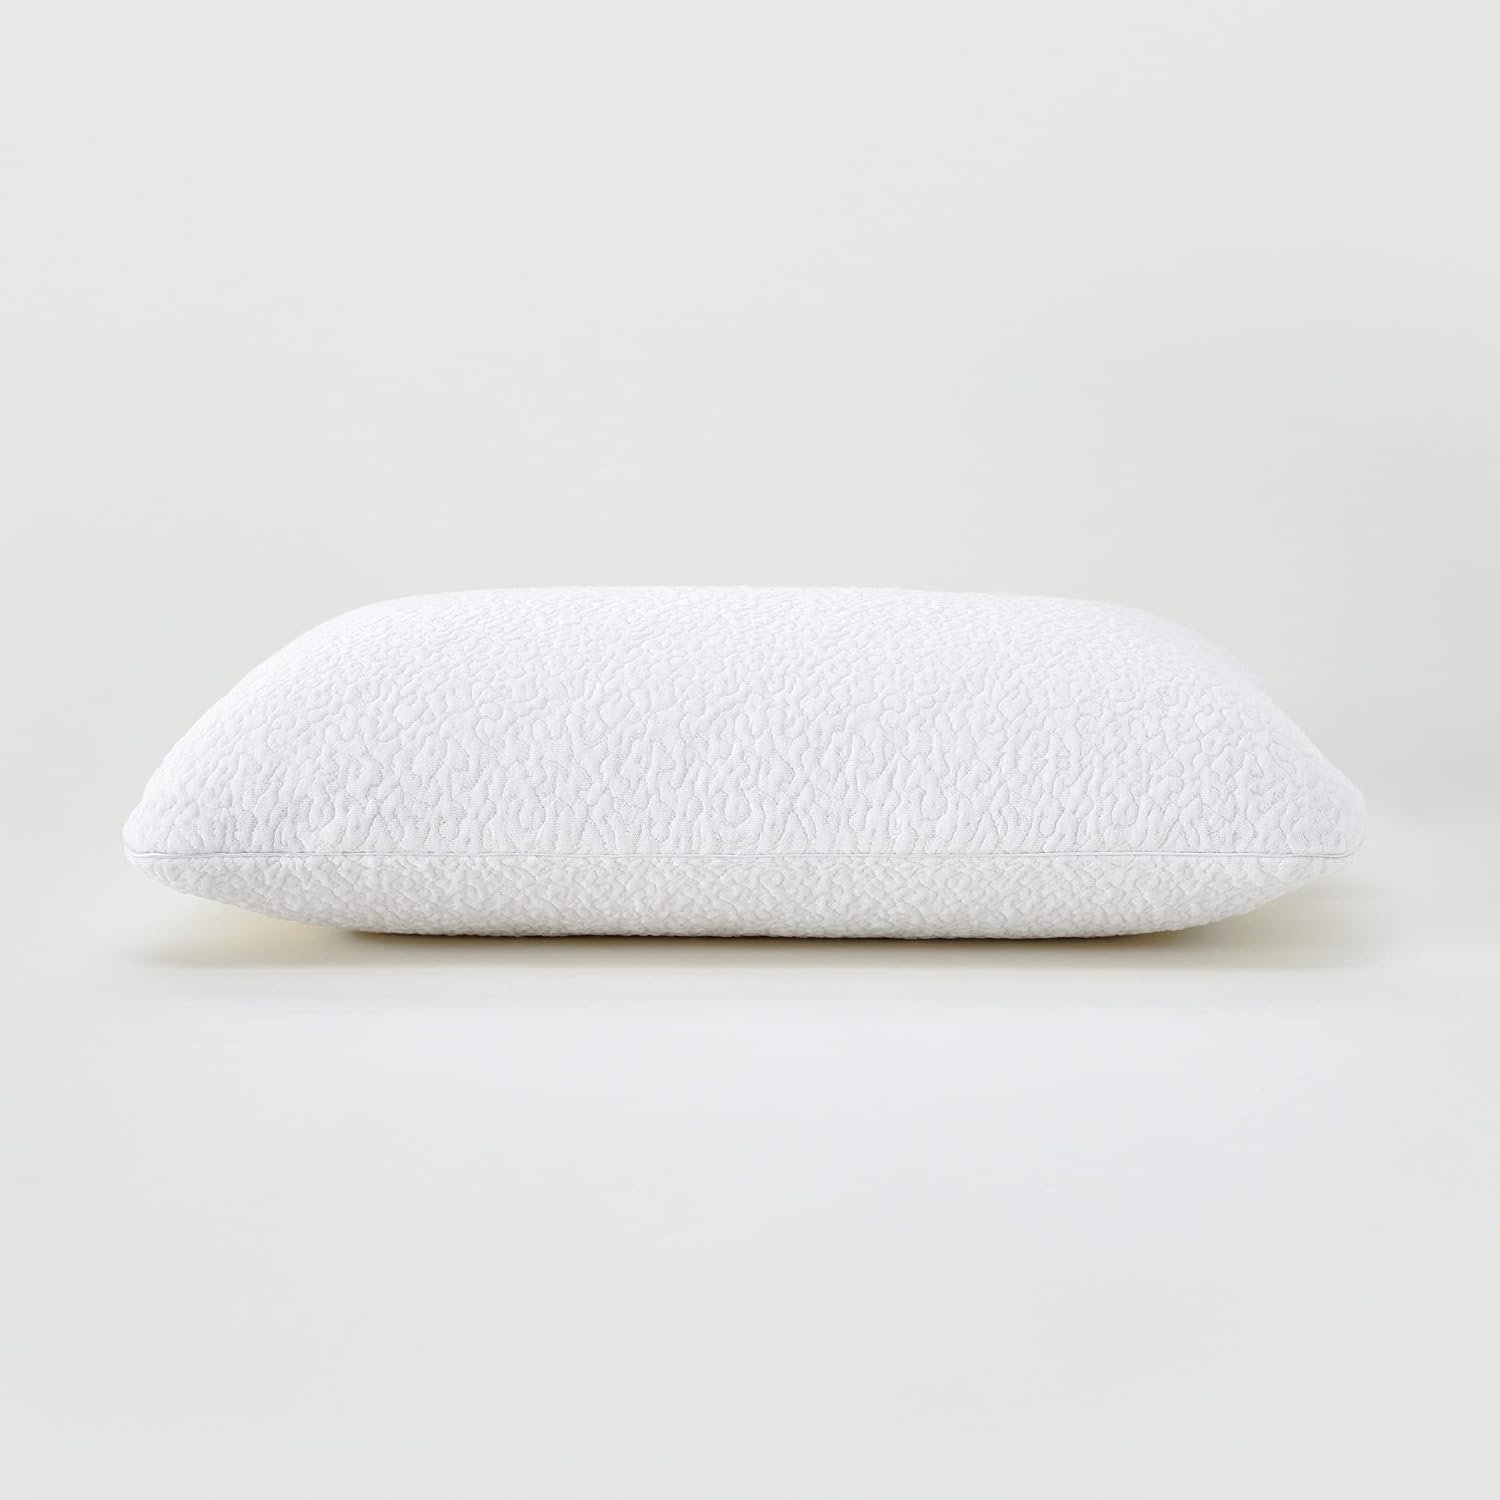 Sijo Clima Latex Pillow, 100% Talalay Latex, Best Cooling Latex Pillow Award Winner by Sleep Foundation, The Most Comfortable Pillow Ever Invented, Great Softness and Support (Standard) : Home  Kitchen